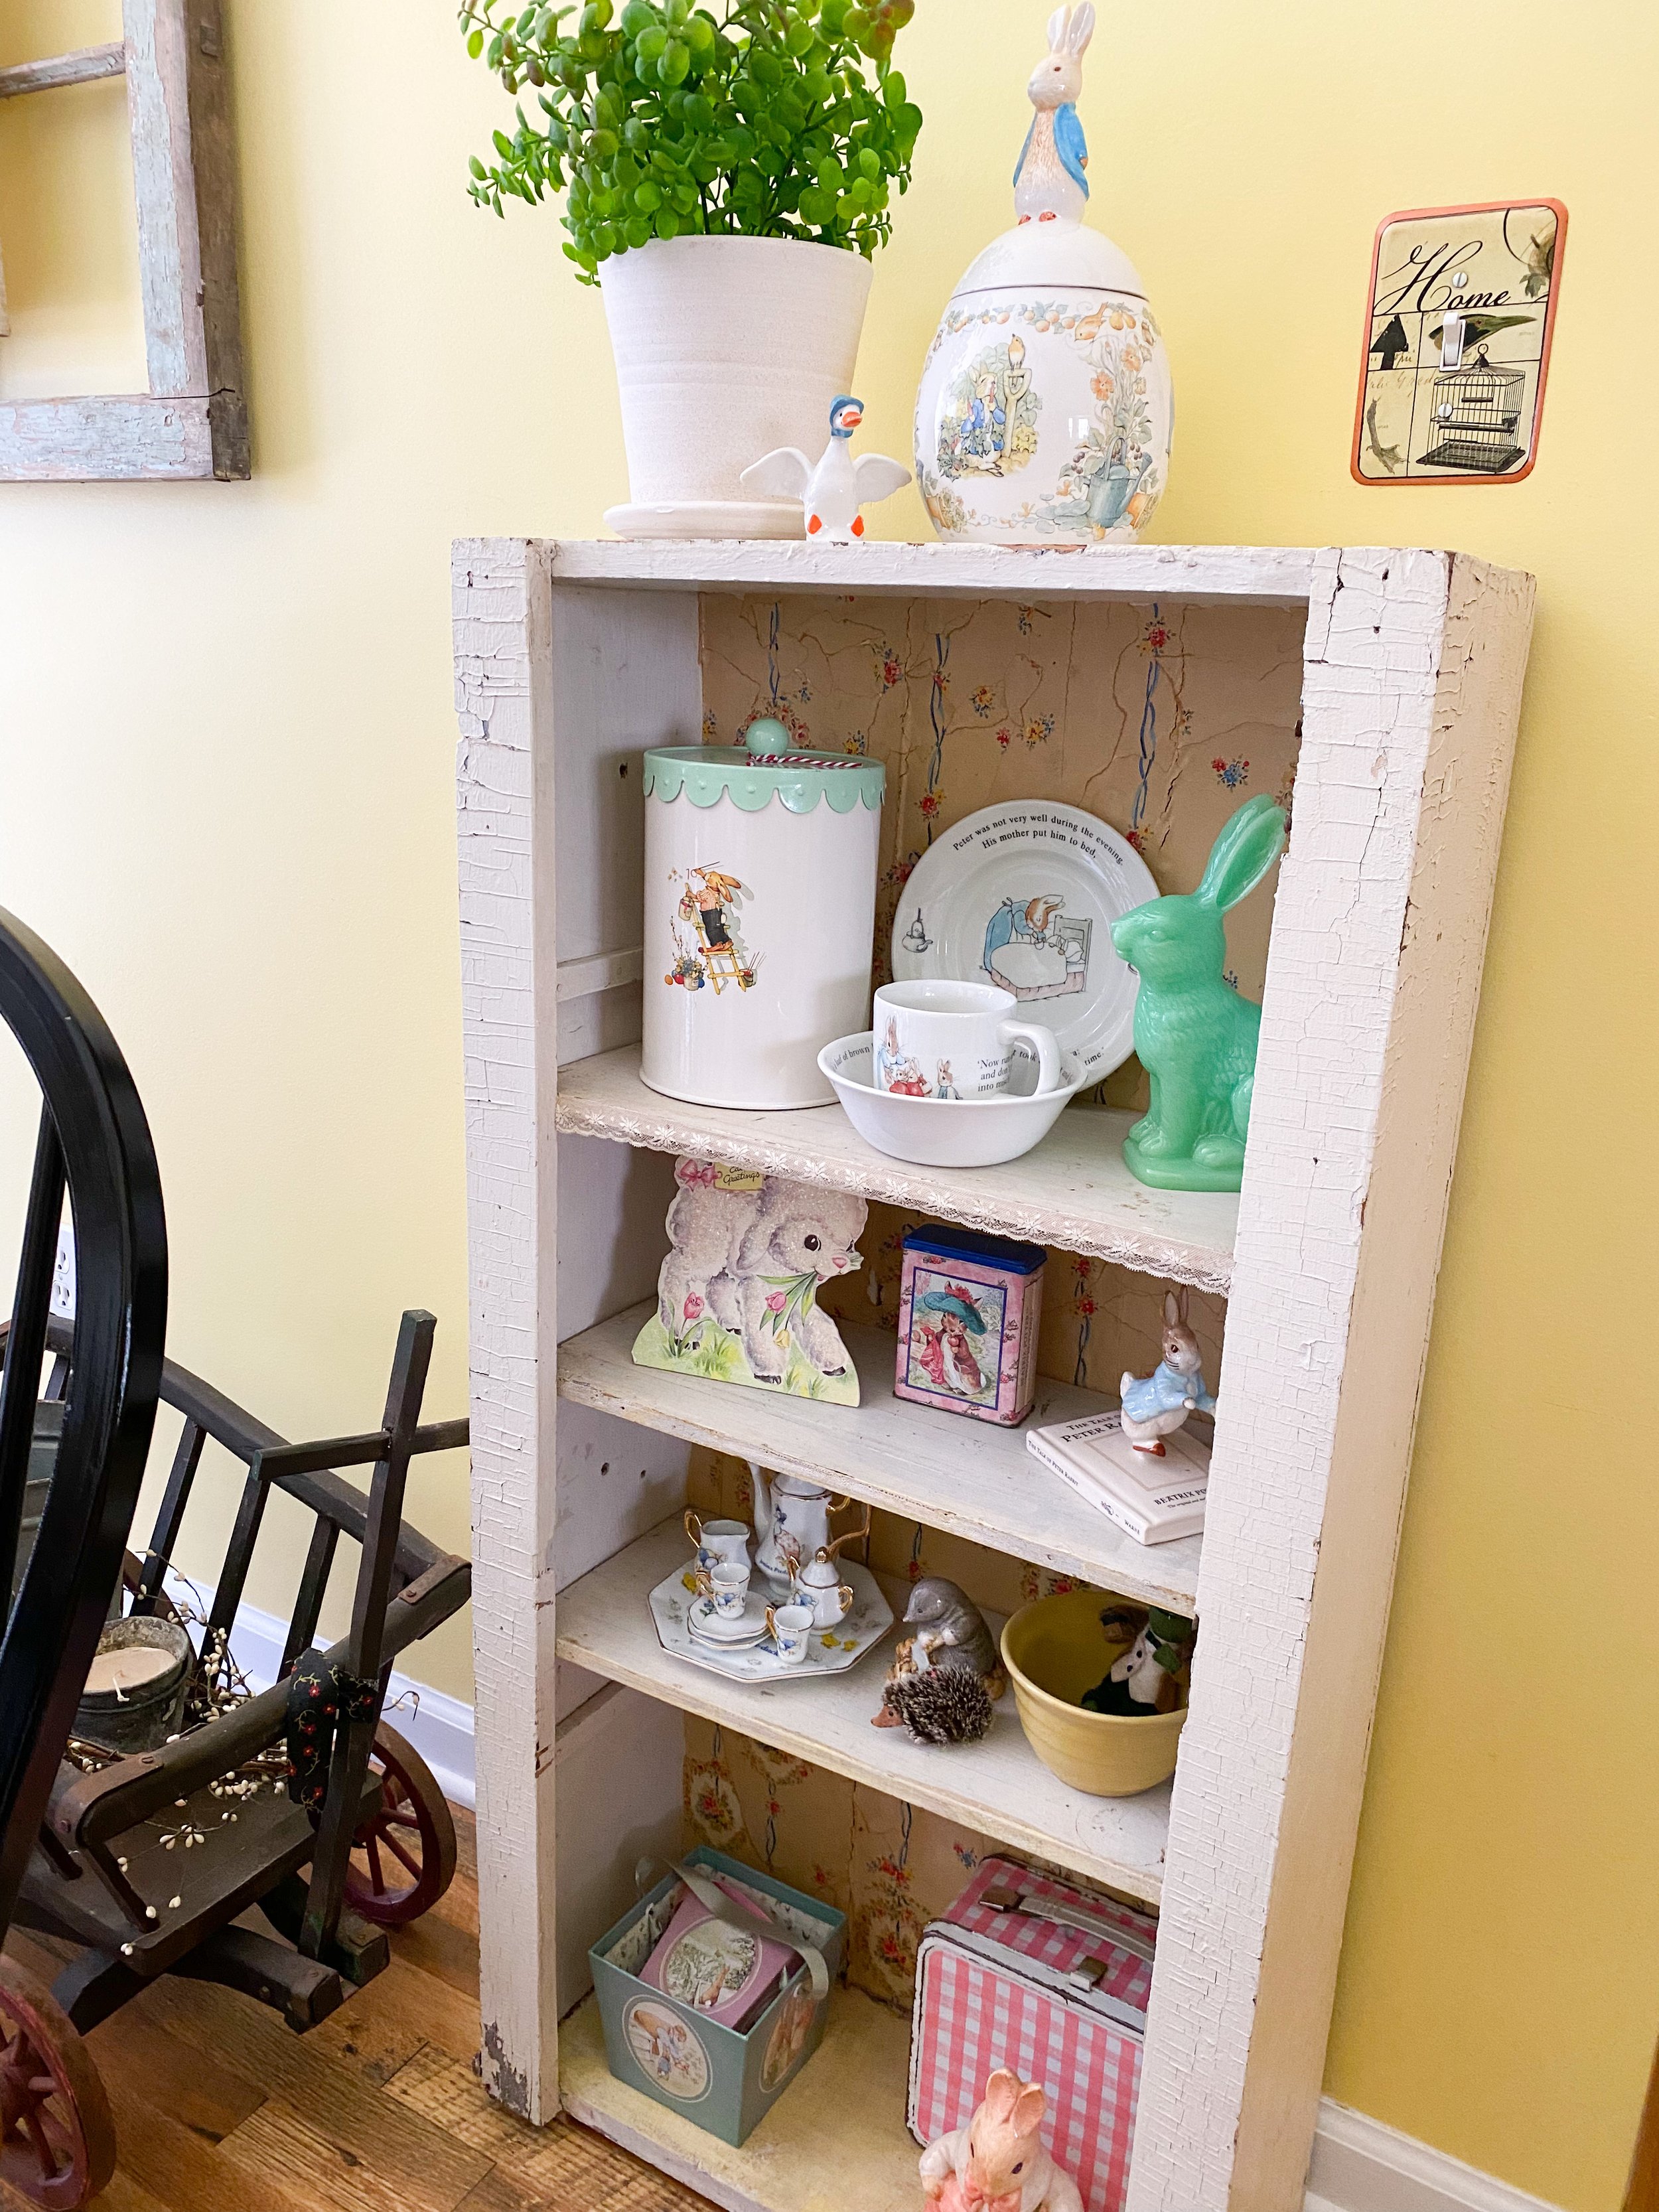 9 Vintage Items To Use & Repurpose As Storage For Home Organization — Emily  Retro - Vintage and DIY Home Design